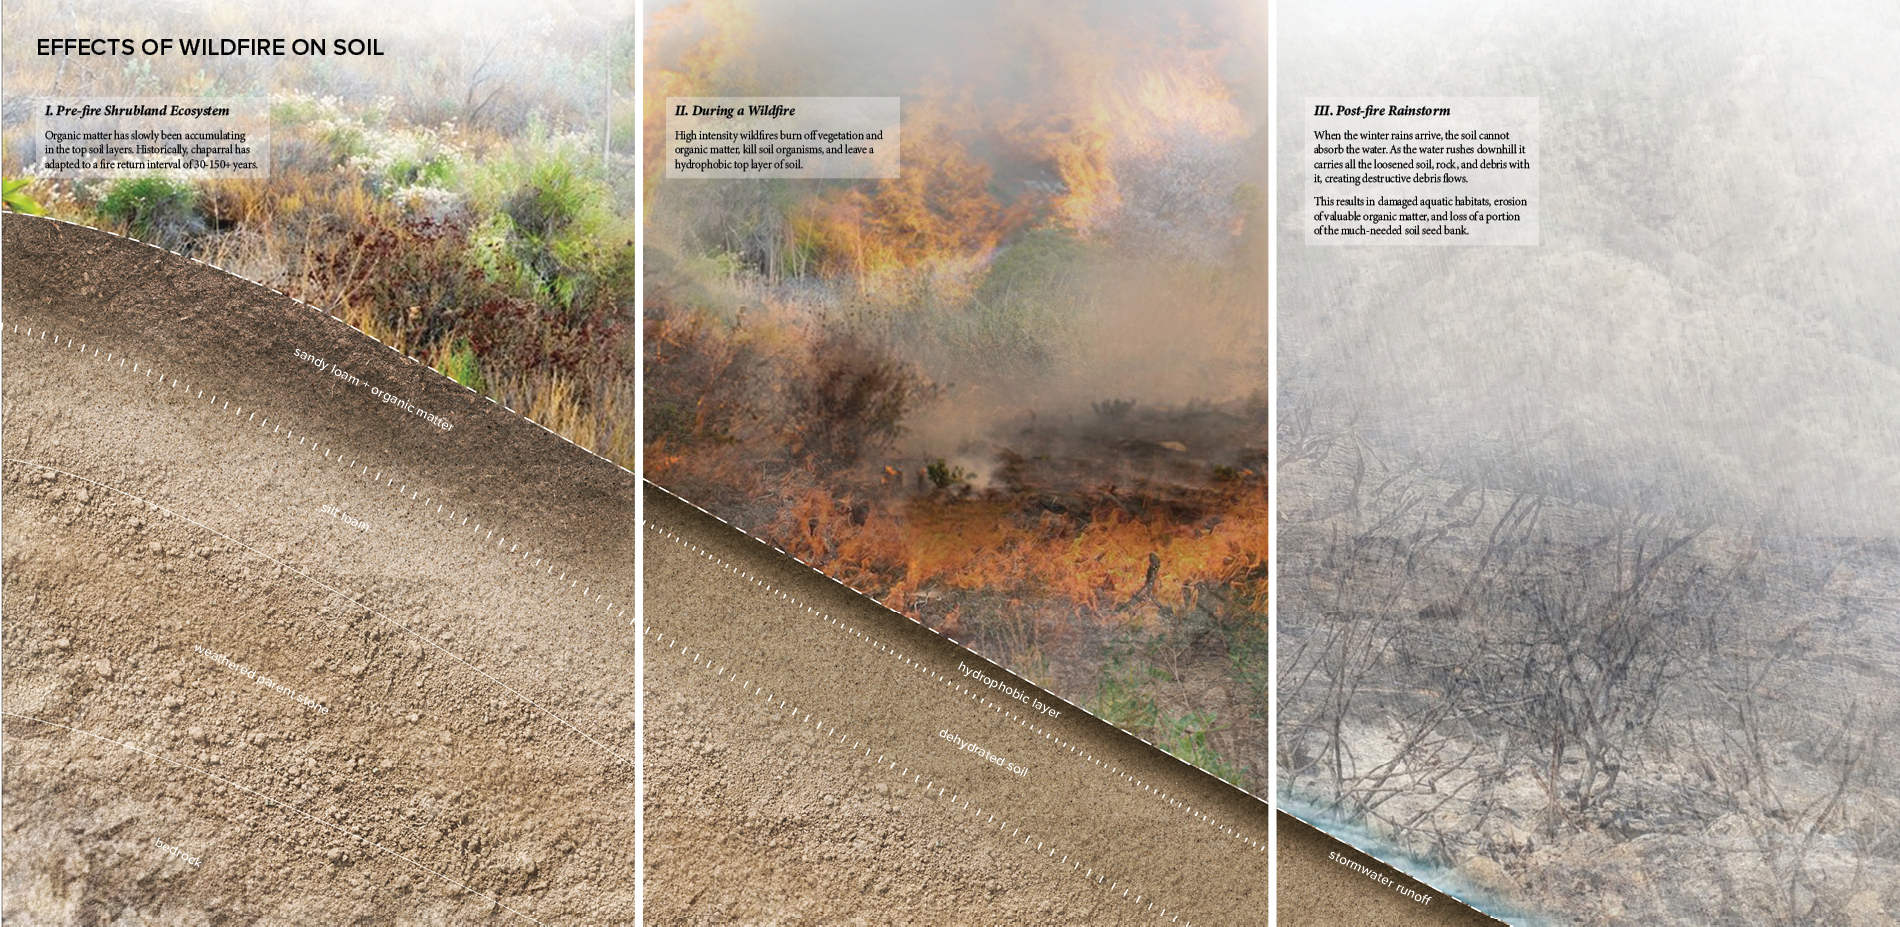 Effects of Wildfire on Soil